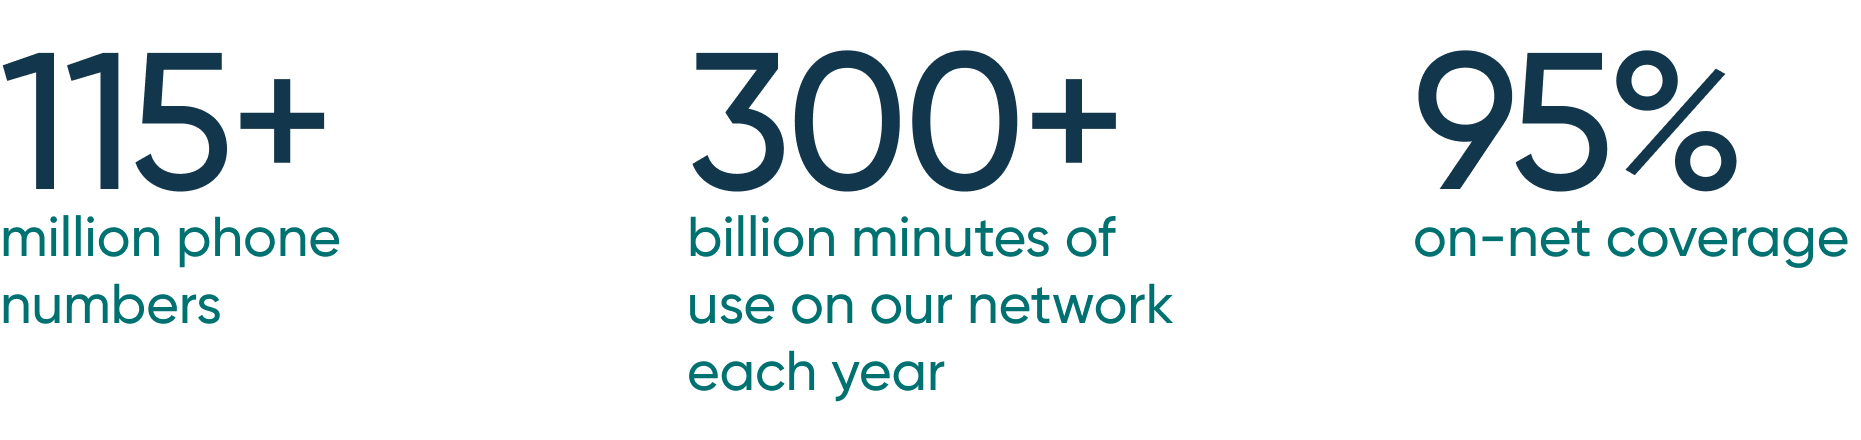 Stats showing the power of the Sinch voice network